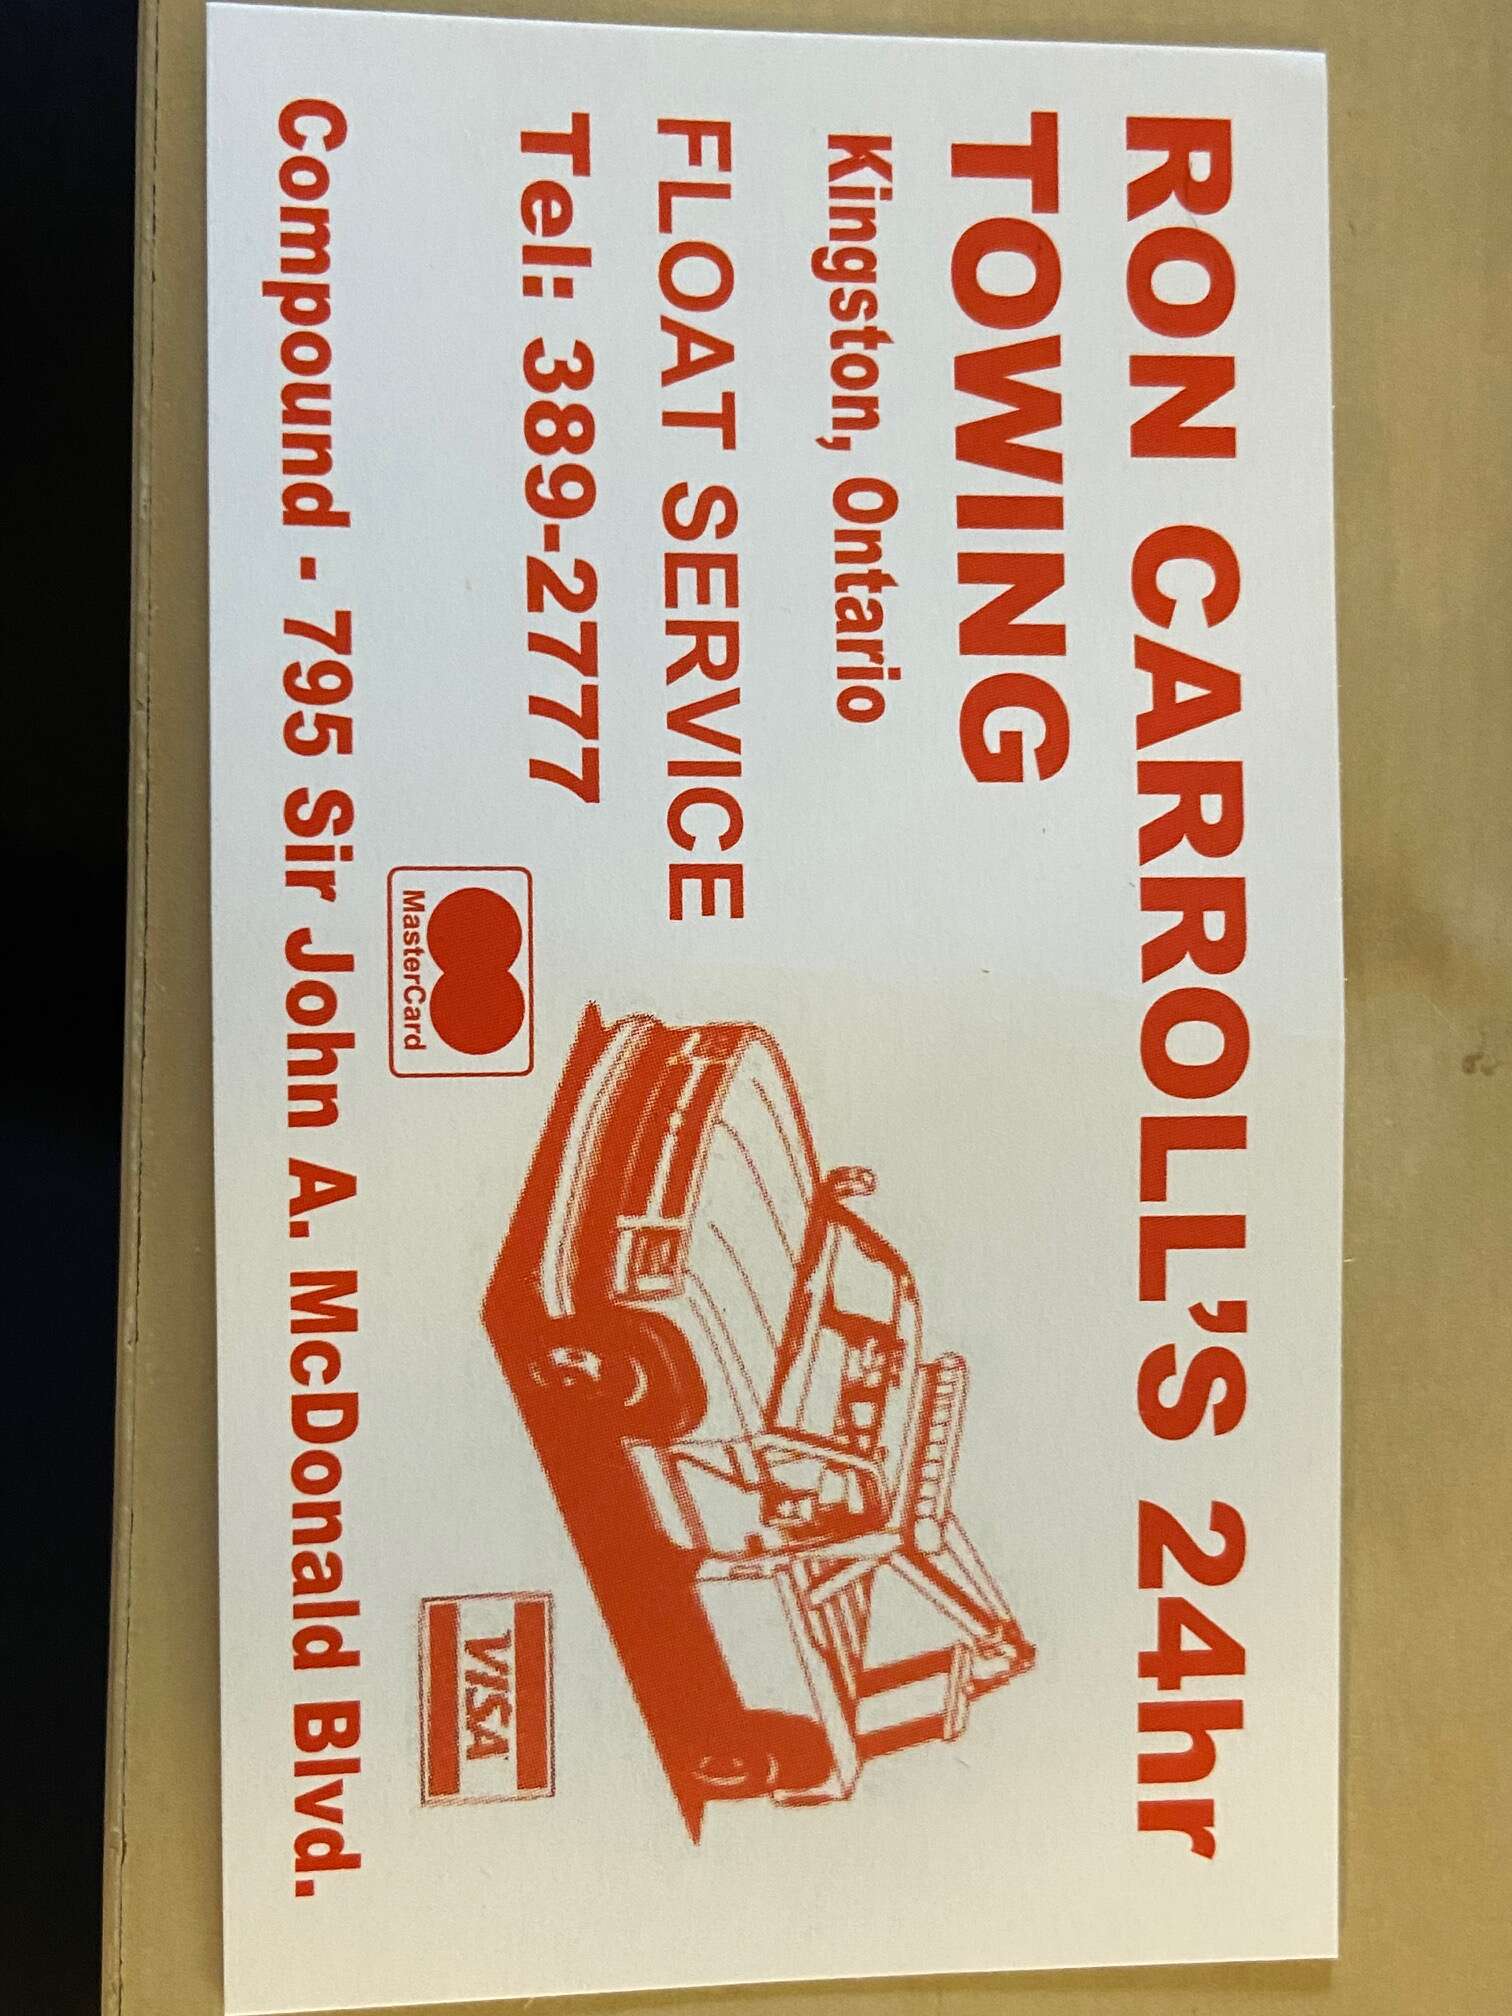 Ron Carroll's Towing